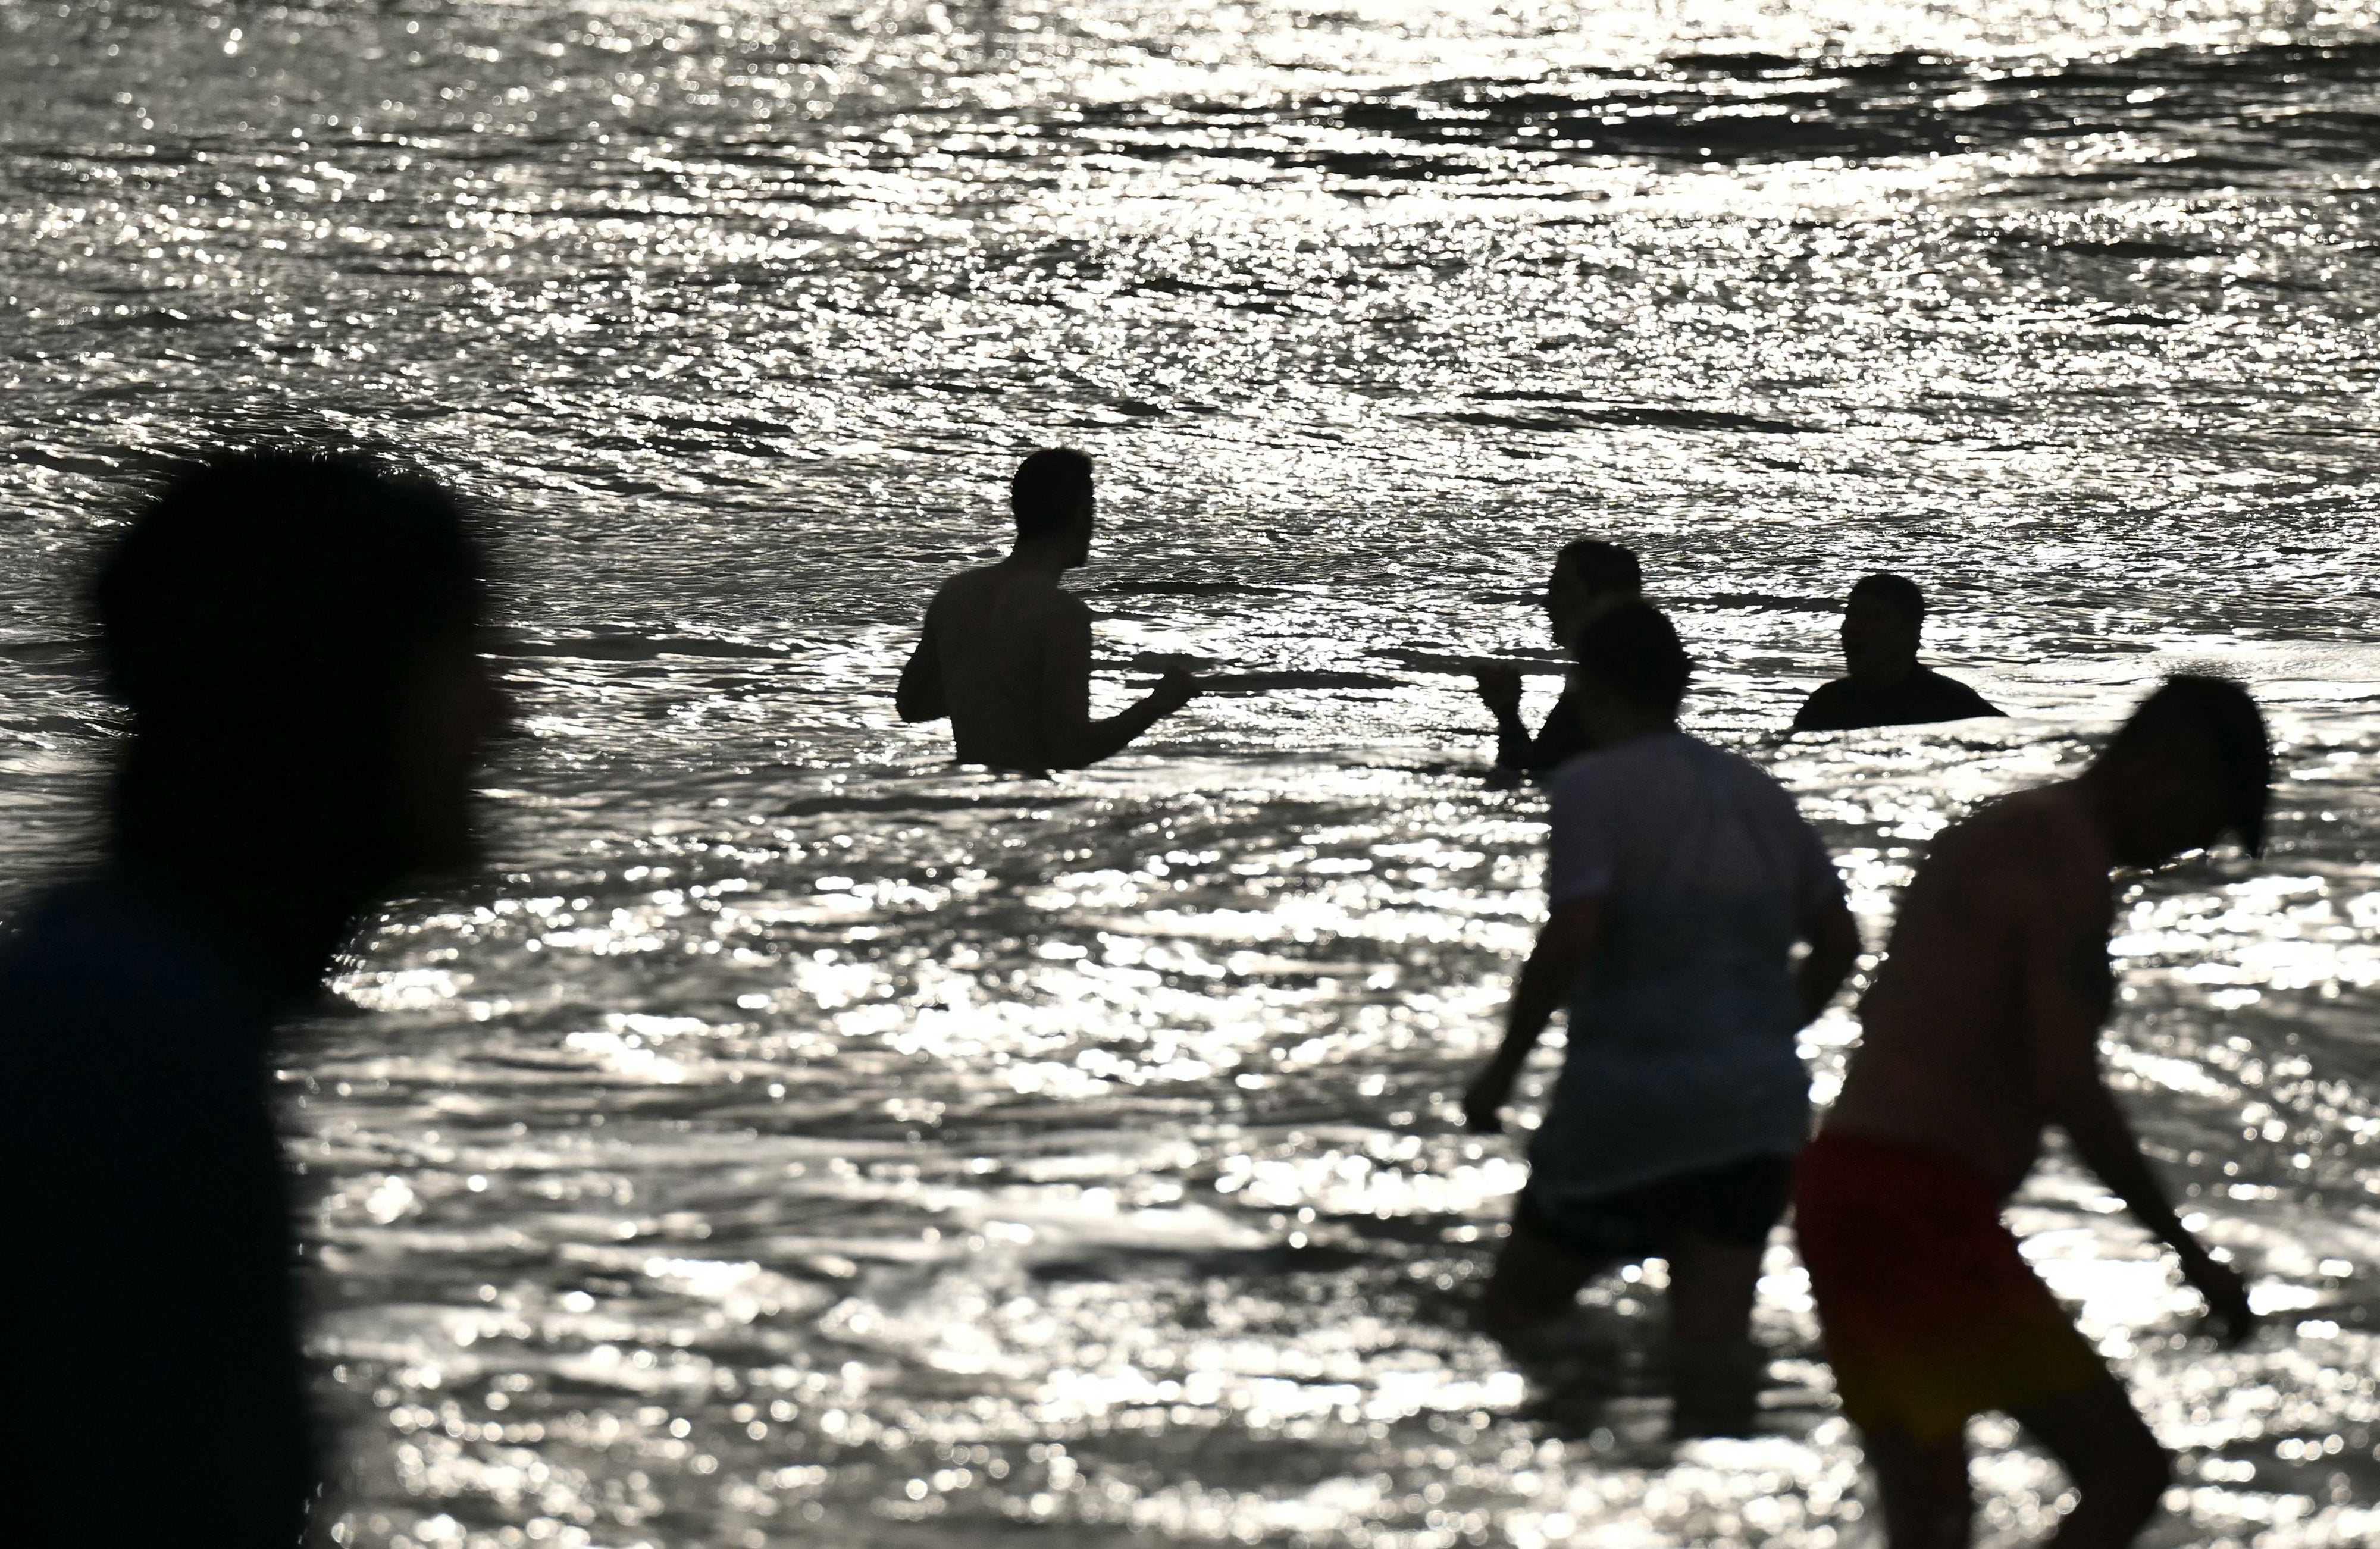 File image: People bathing on the beach. The study says water forecast models, currently in use at over 600 designated bathing locations in the UK, are insufficient to ensure public safety